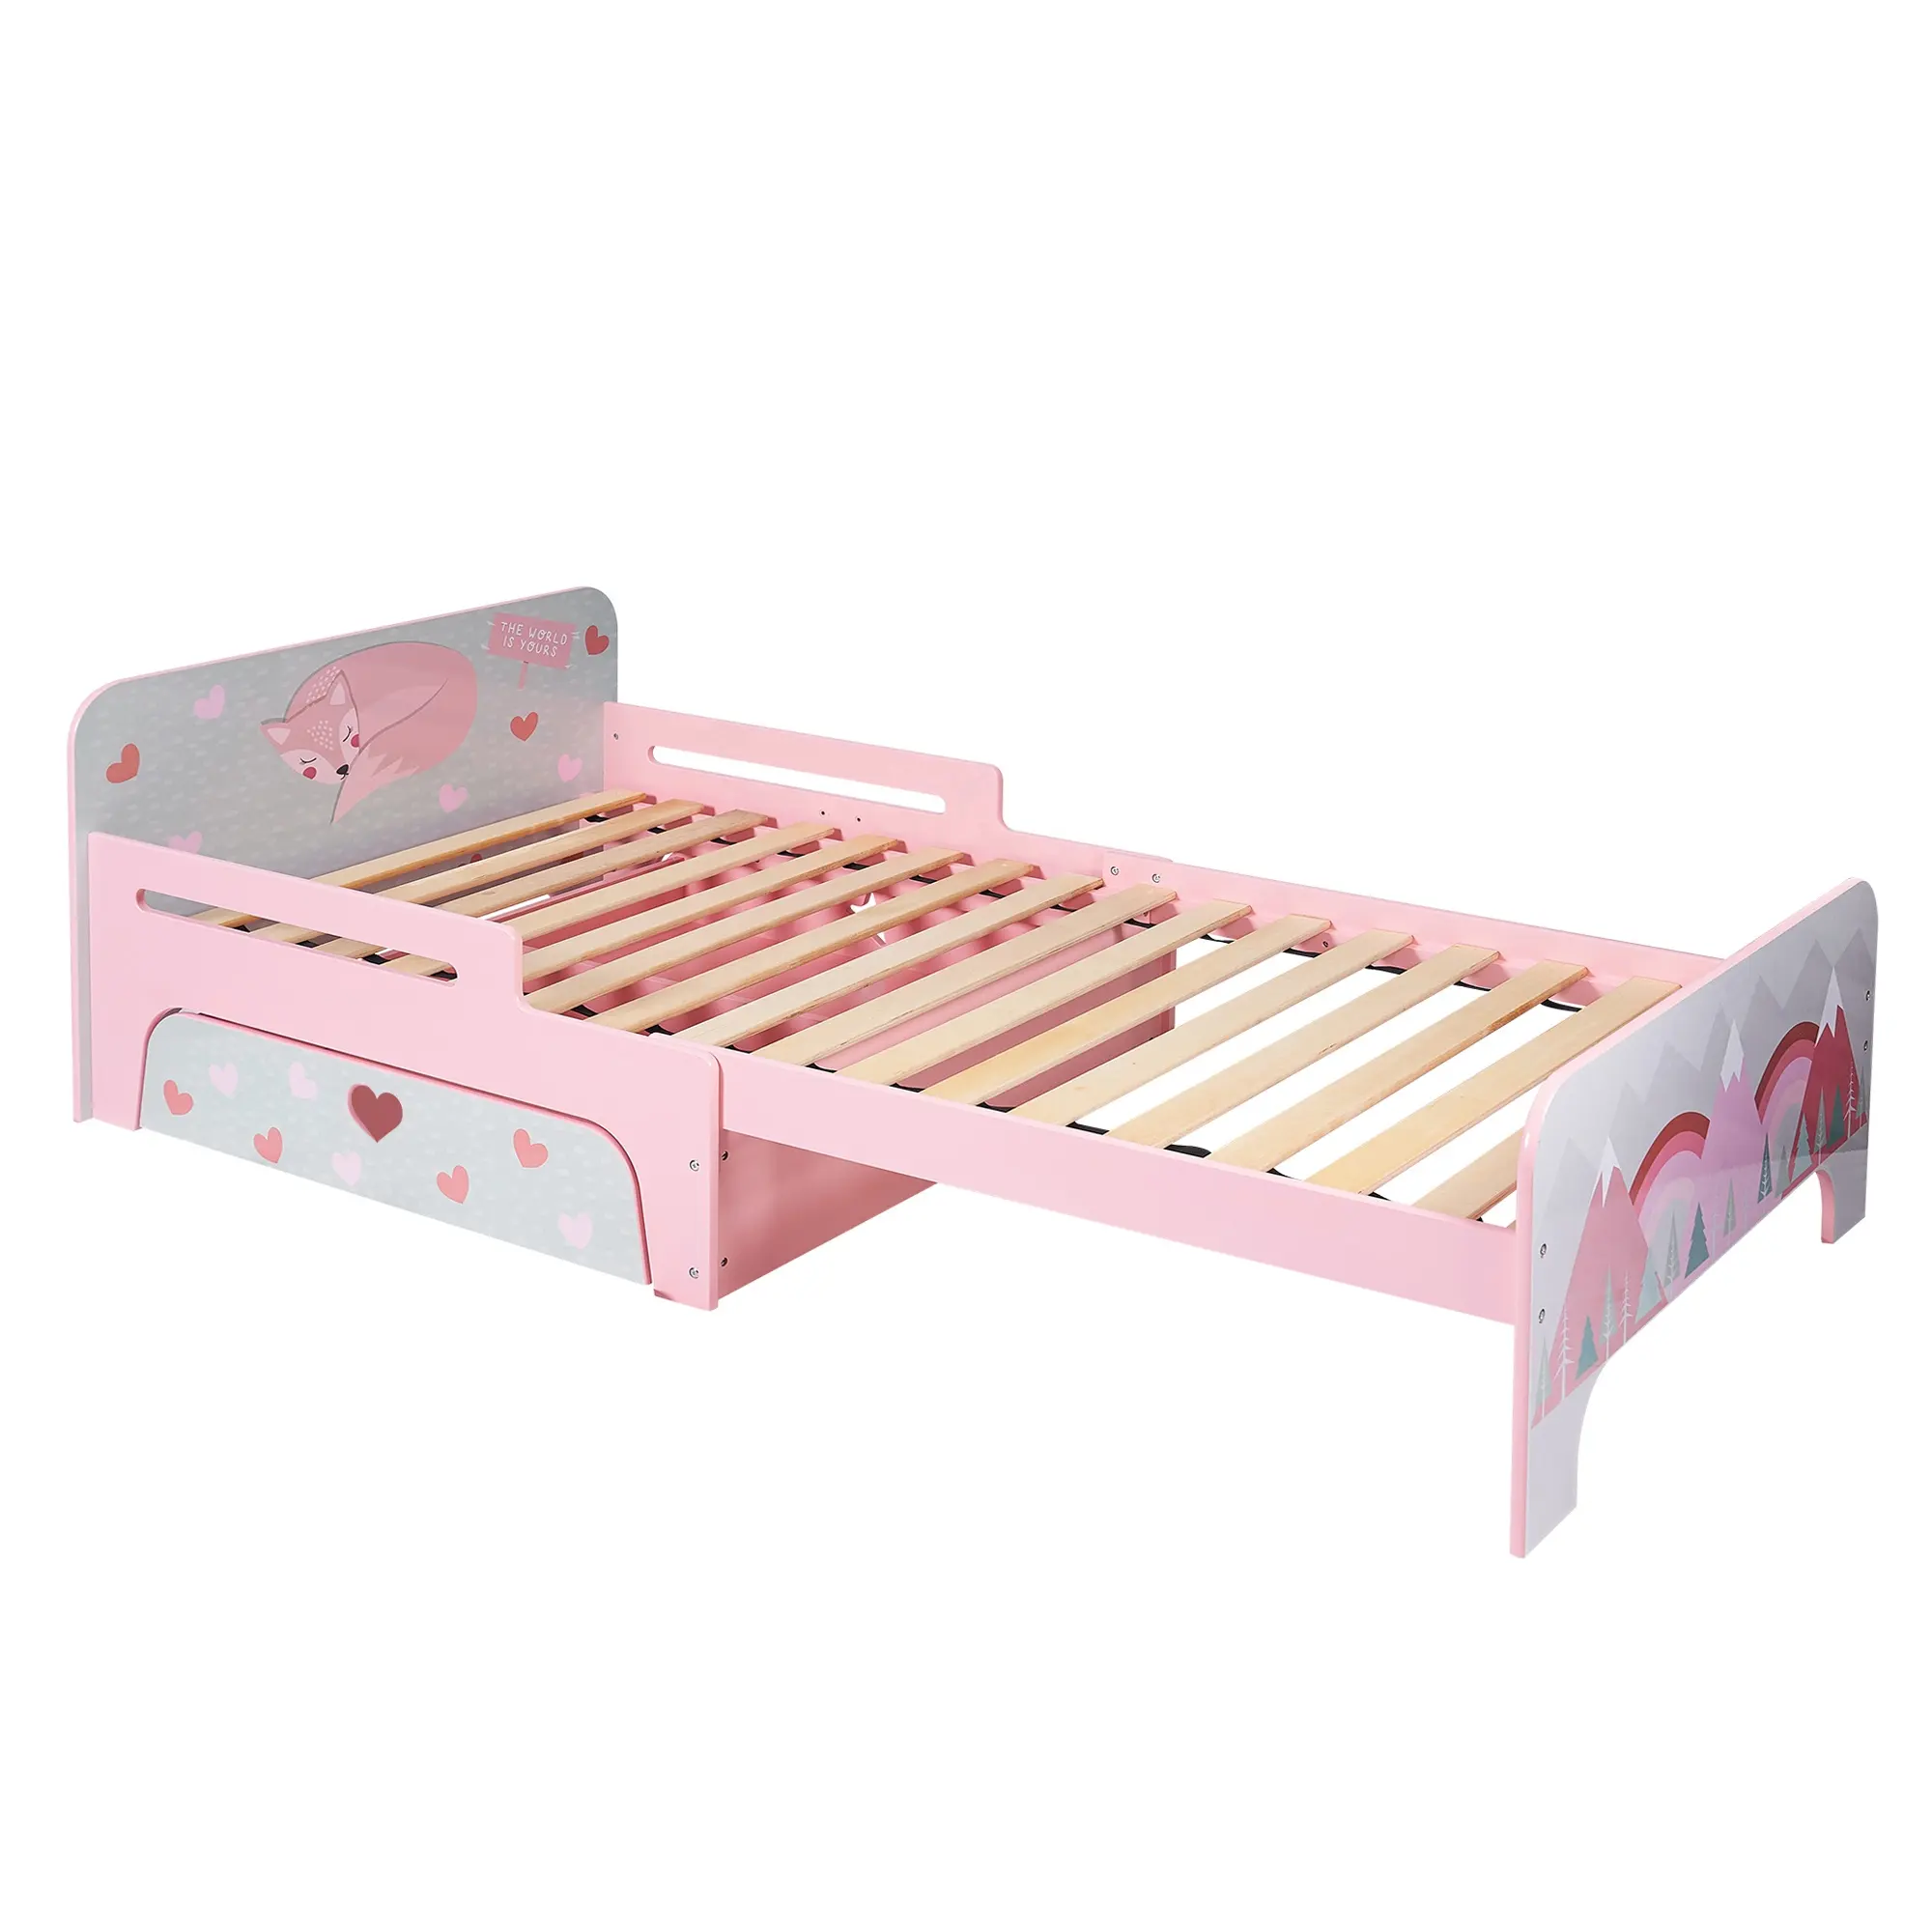 Toffy   Friends Wooden kids bed toddler bed kids furniture extension bed